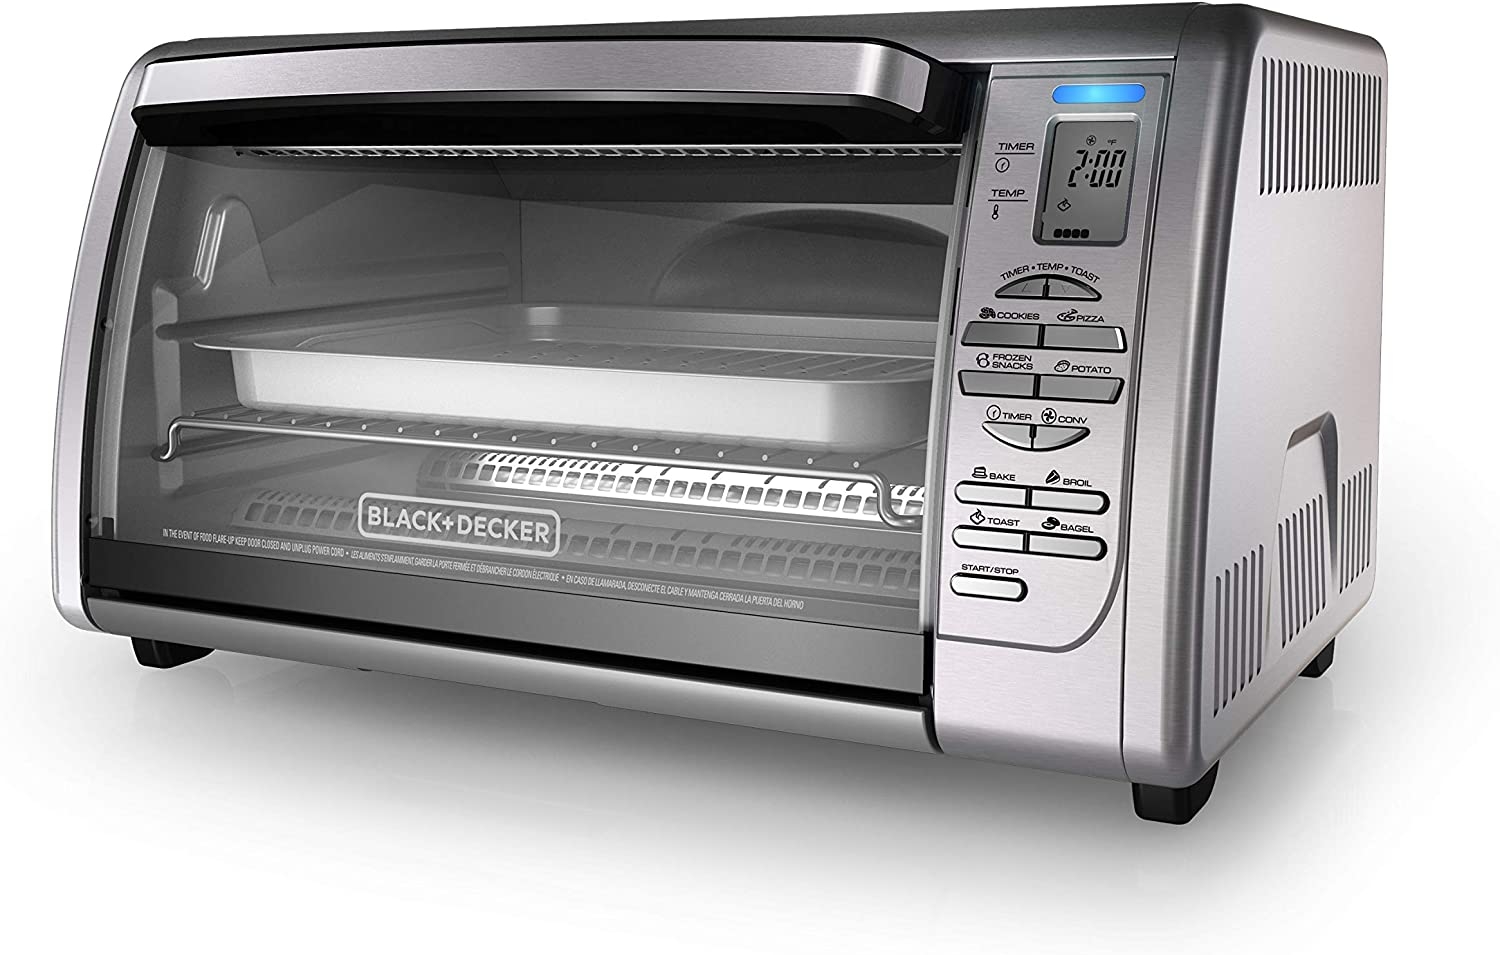 BLACK+DECKER 02648008504 Countertop Convection Toaster Oven, Silver, CTO6335S Import To Shop ×Product customization General